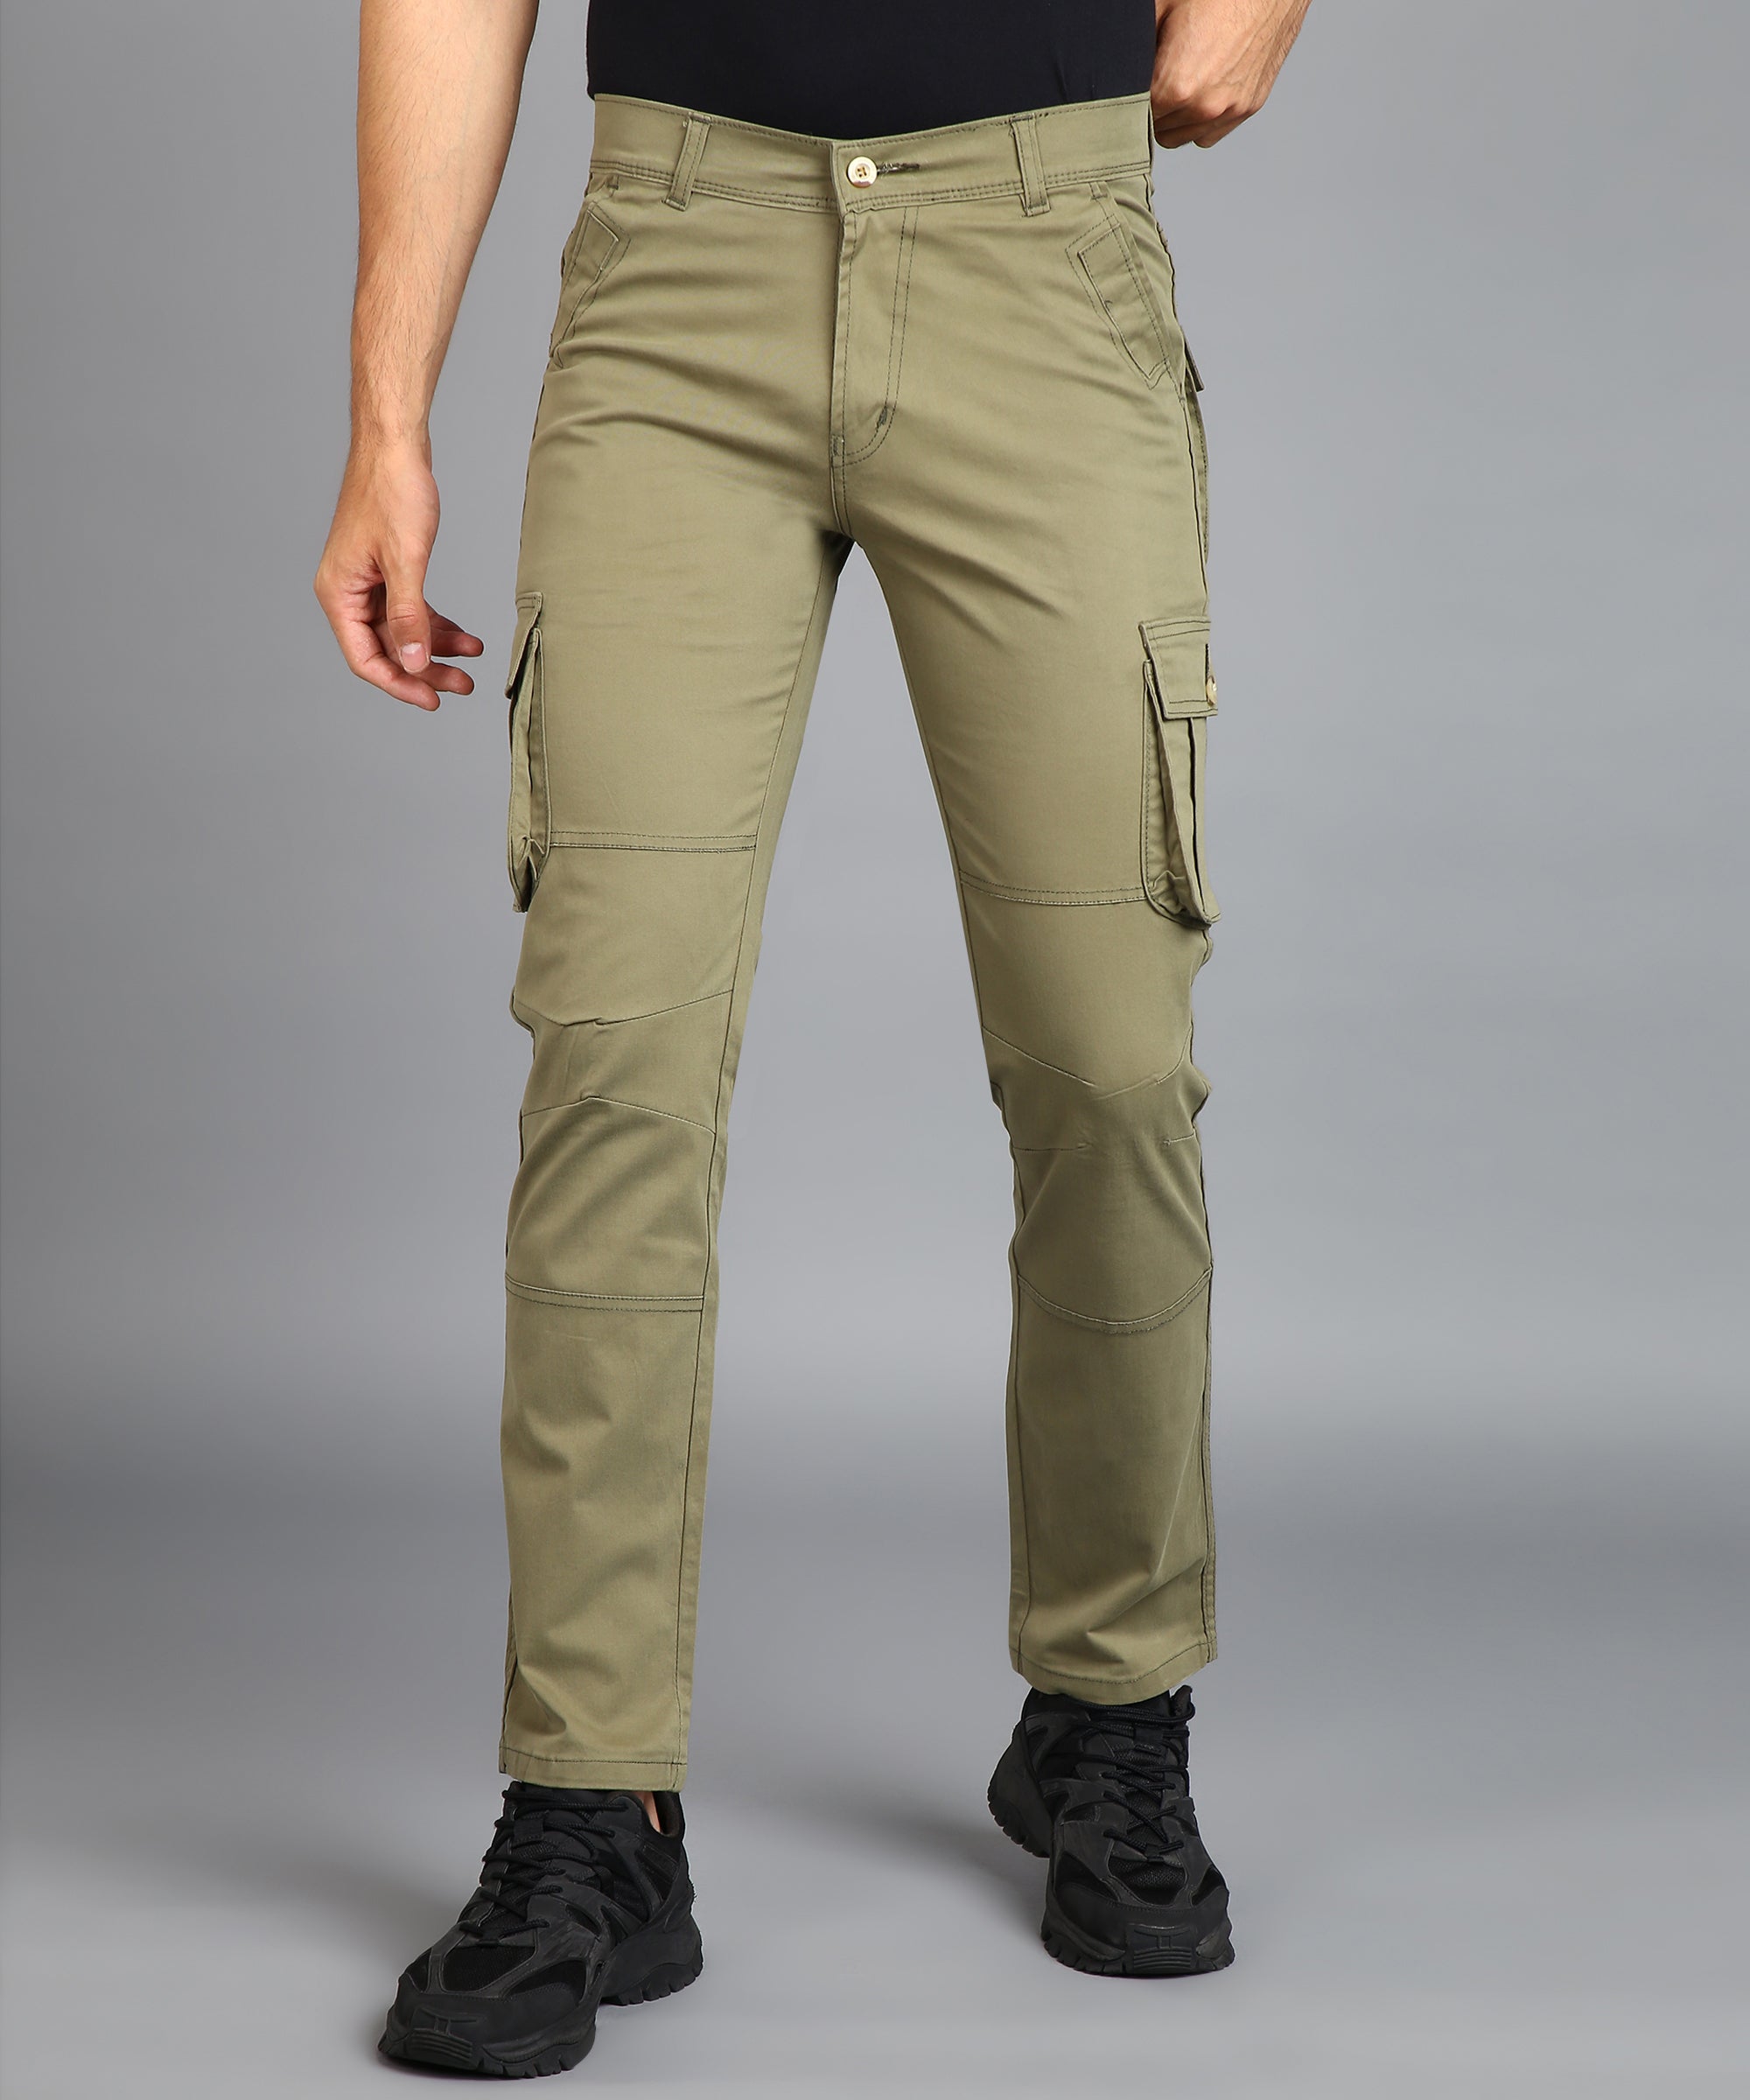 Men's Olive Green Regular Fit Solid Cargo Chino Pant with 6 Pockets